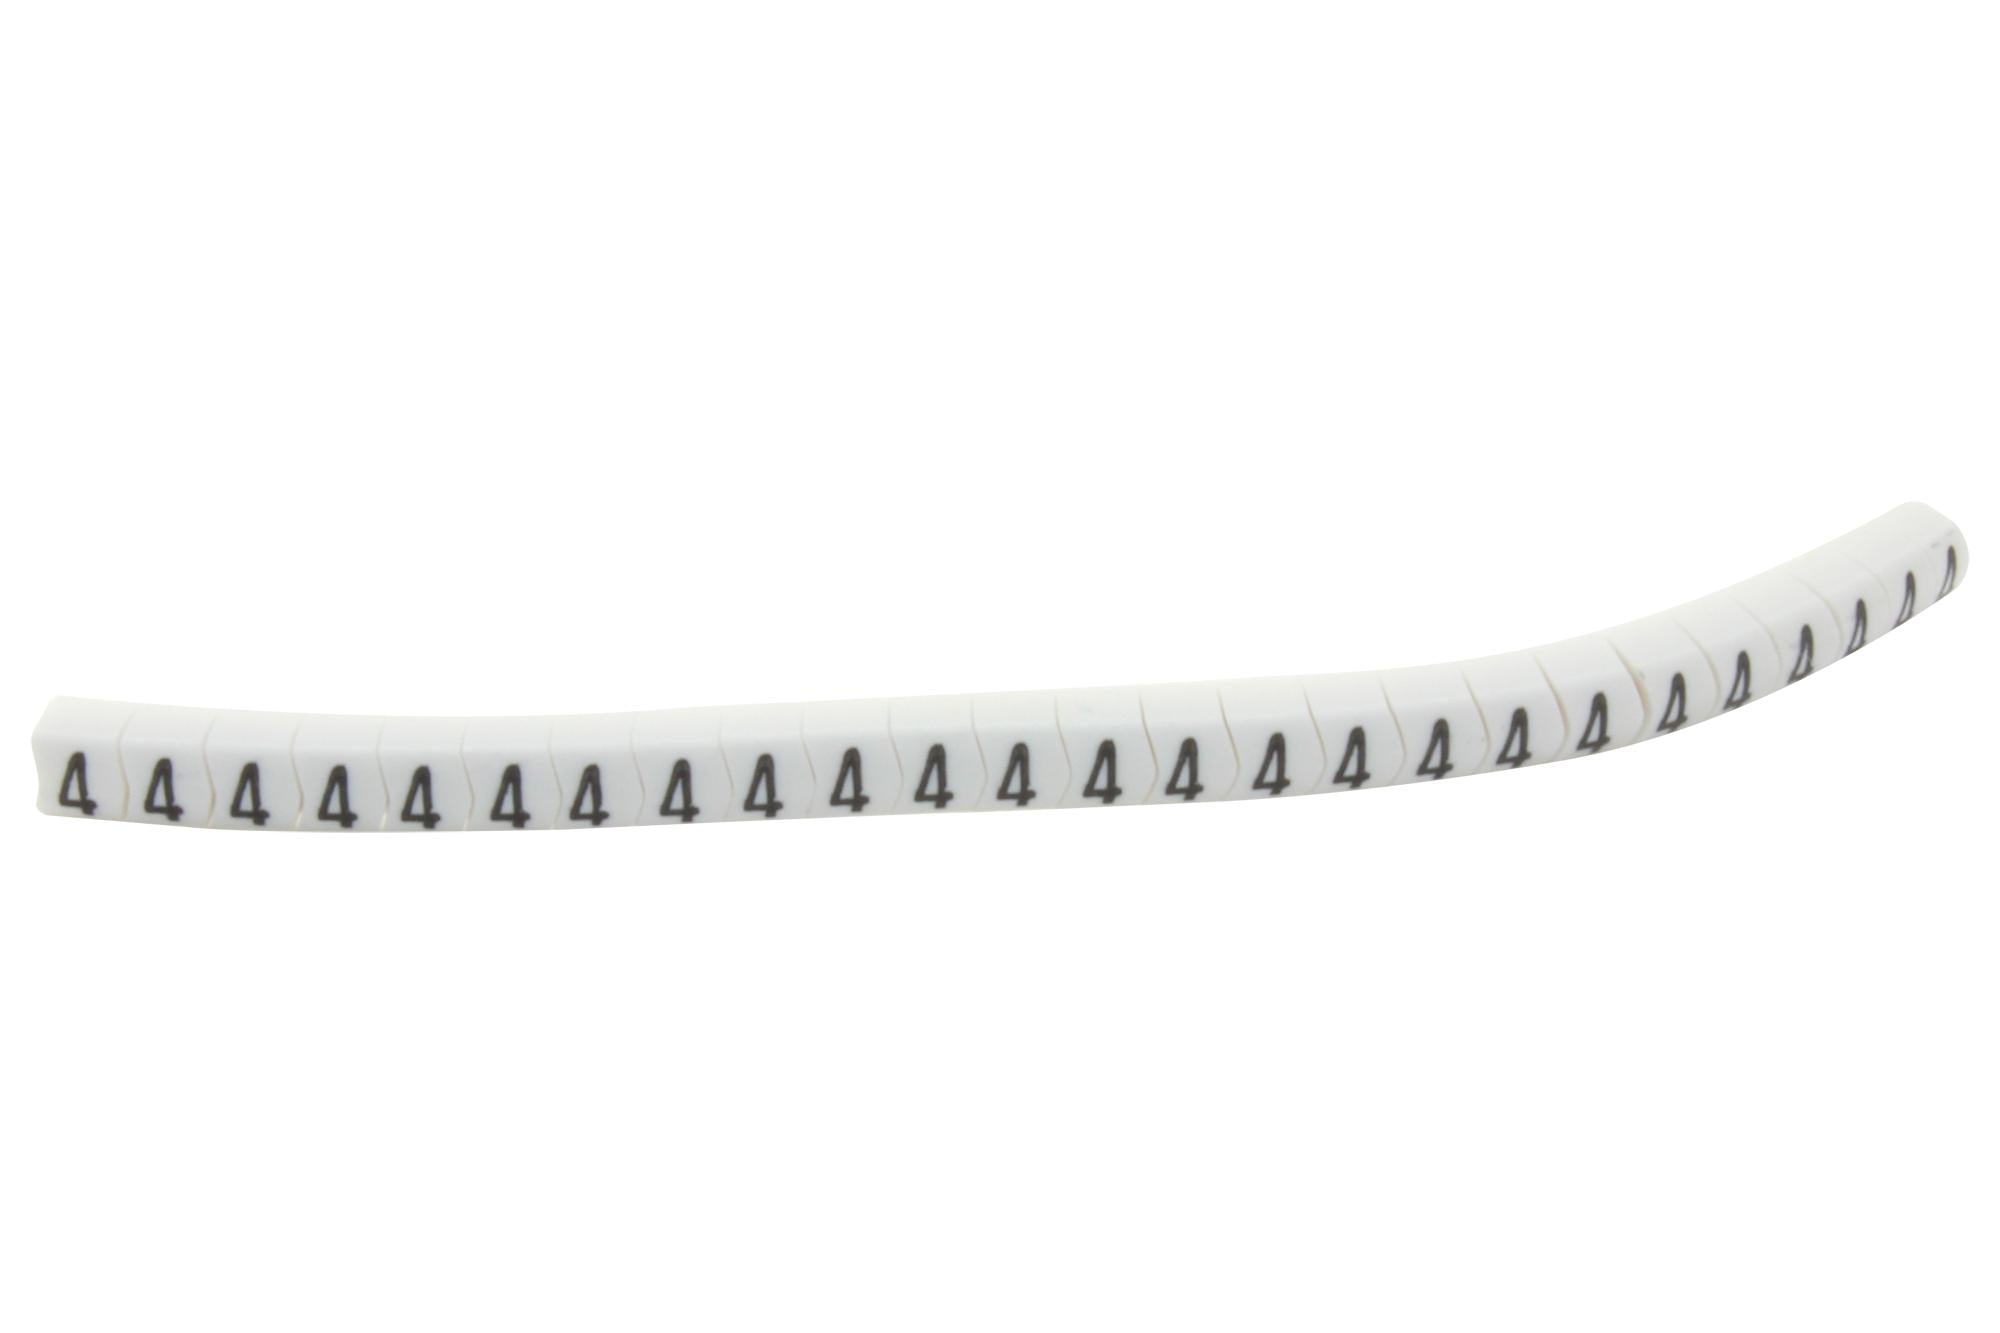 901-11069 CABLE MARKER, PRE PRINTED, PVC, WHITE HELLERMANNTYTON